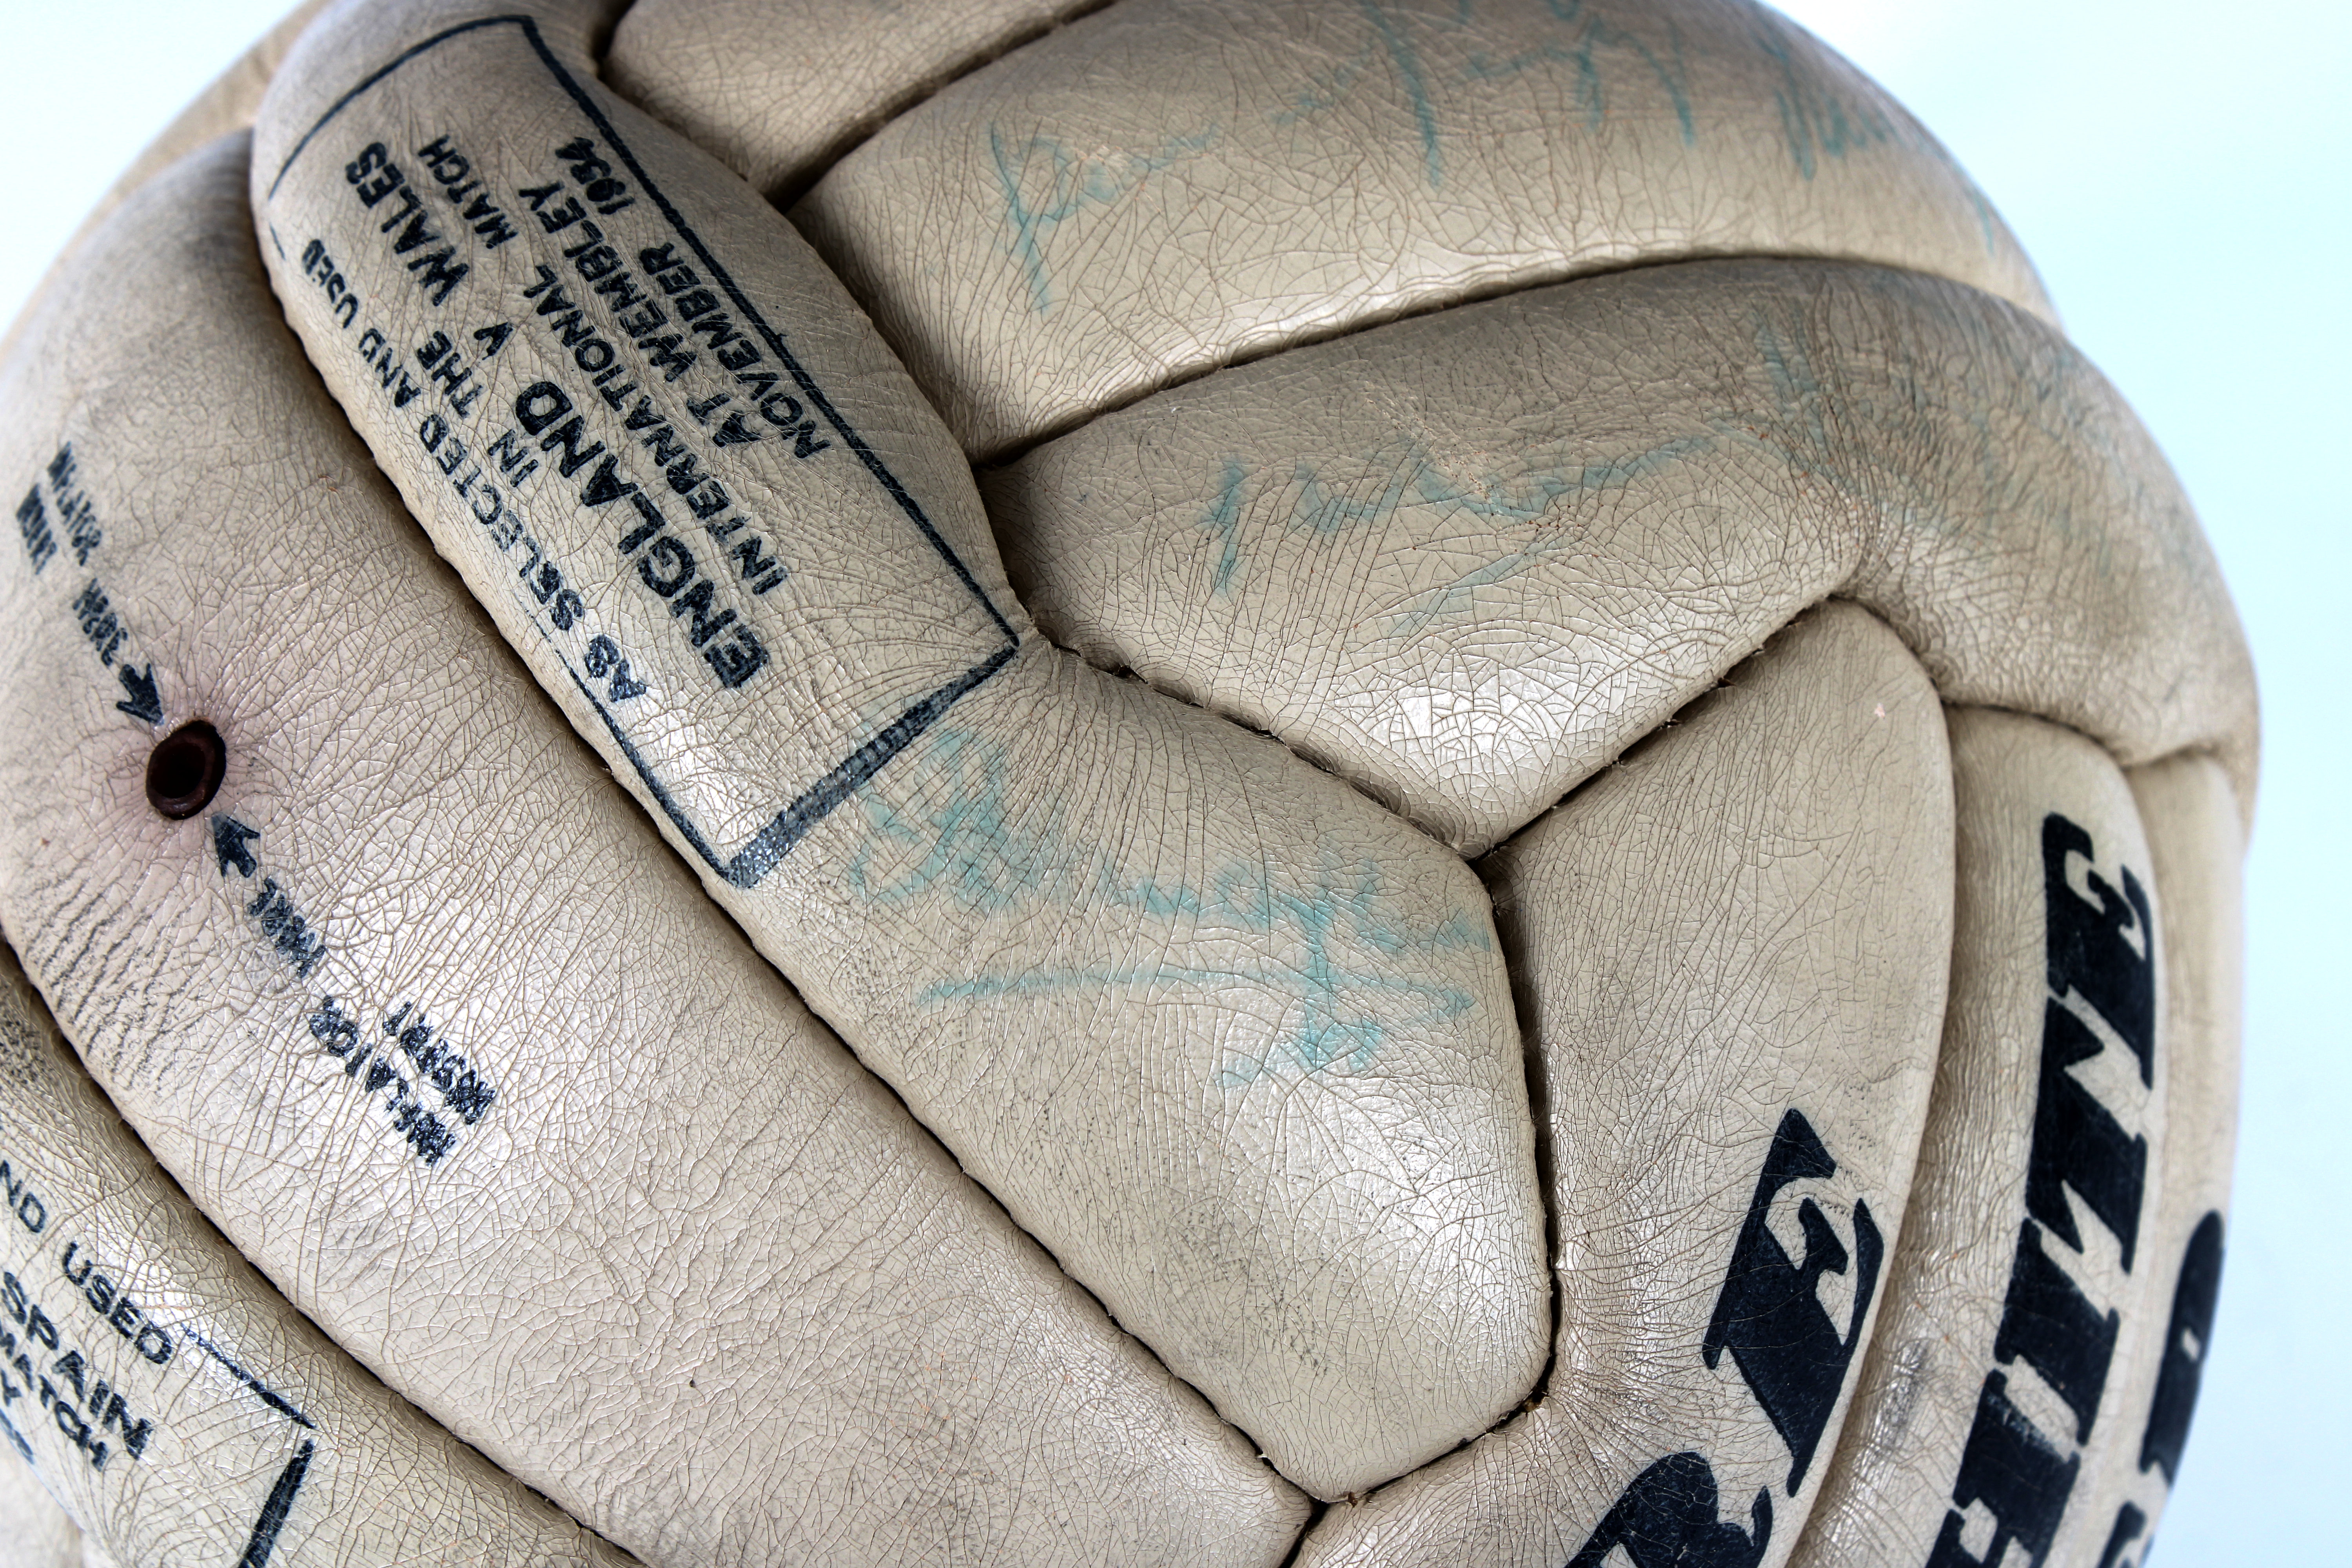 Busby Babes interest. A hand stitched leather football signed by players from Manchester United 1956 - Image 5 of 6